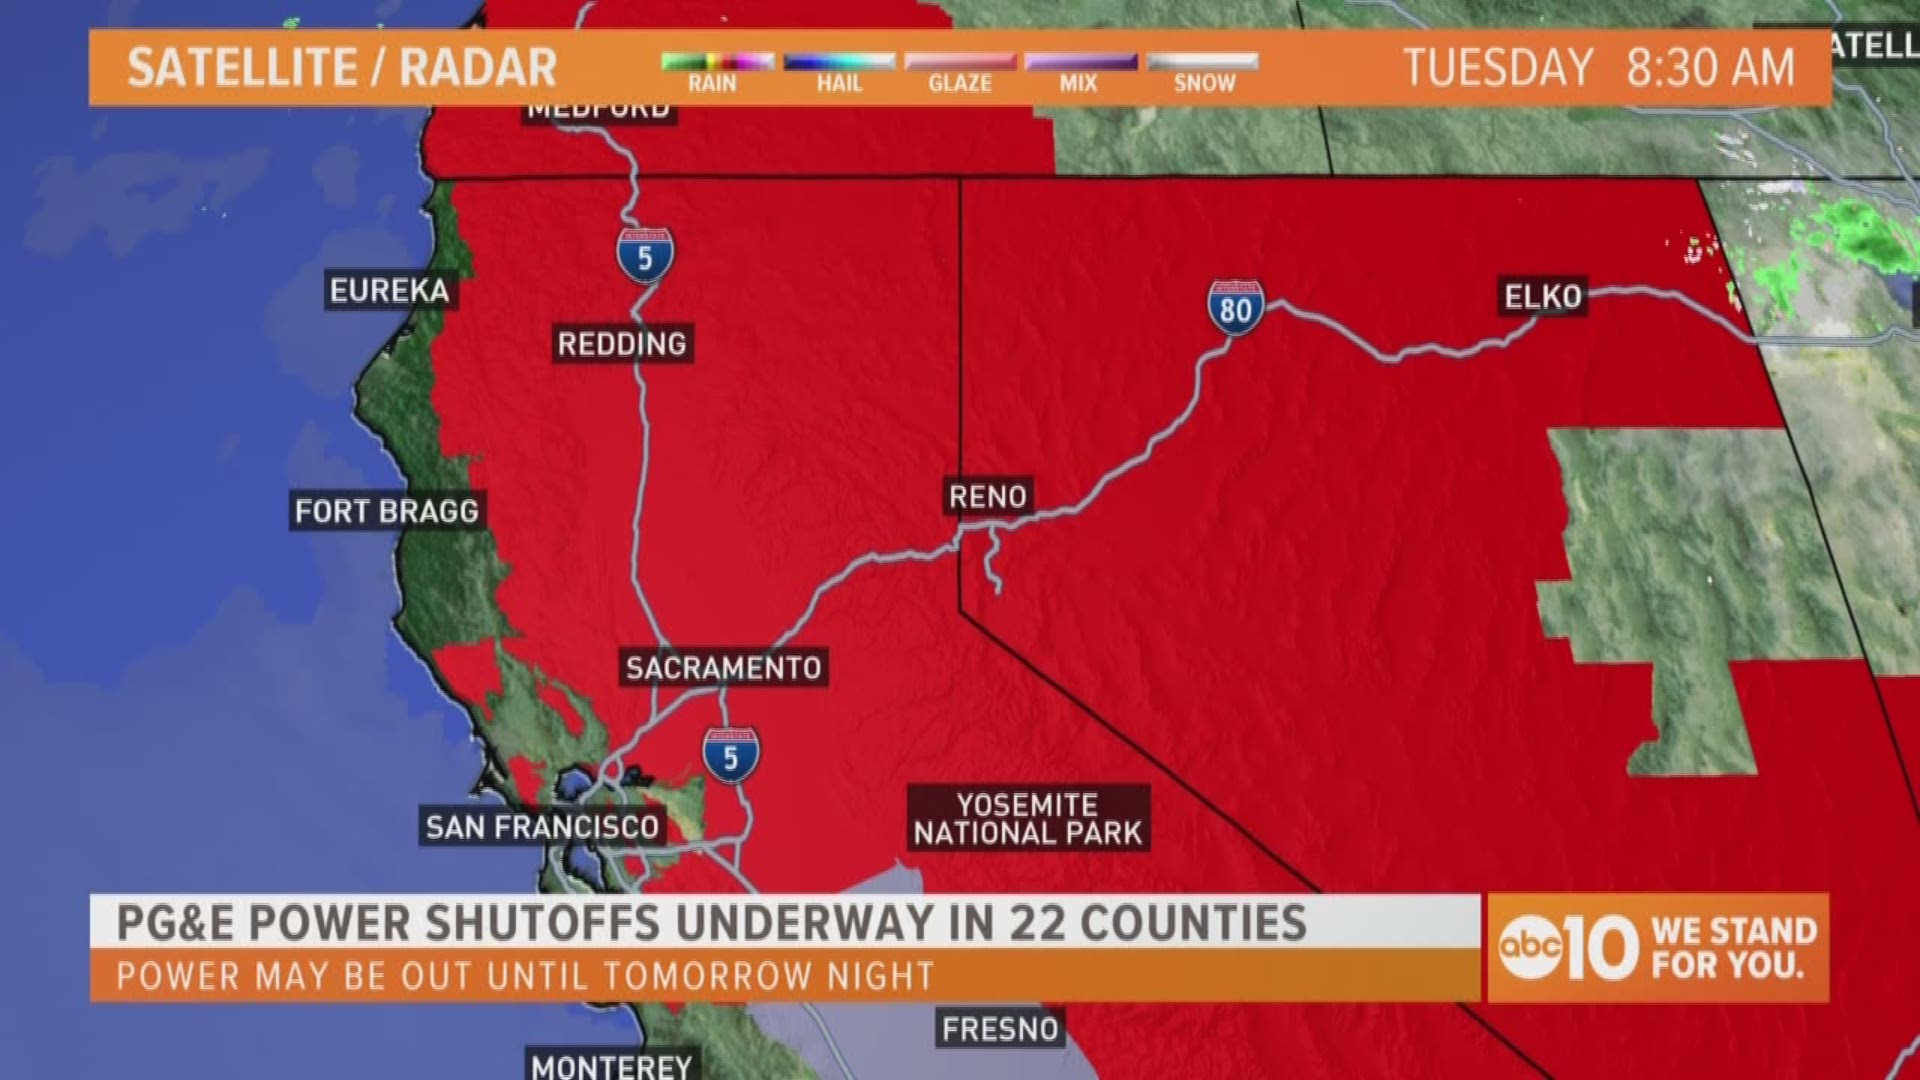 PG&E power shutoffs were prompted by strong winds and dry heat. Meteorologist Rob Carlmark breaks down what this means for Northern California.